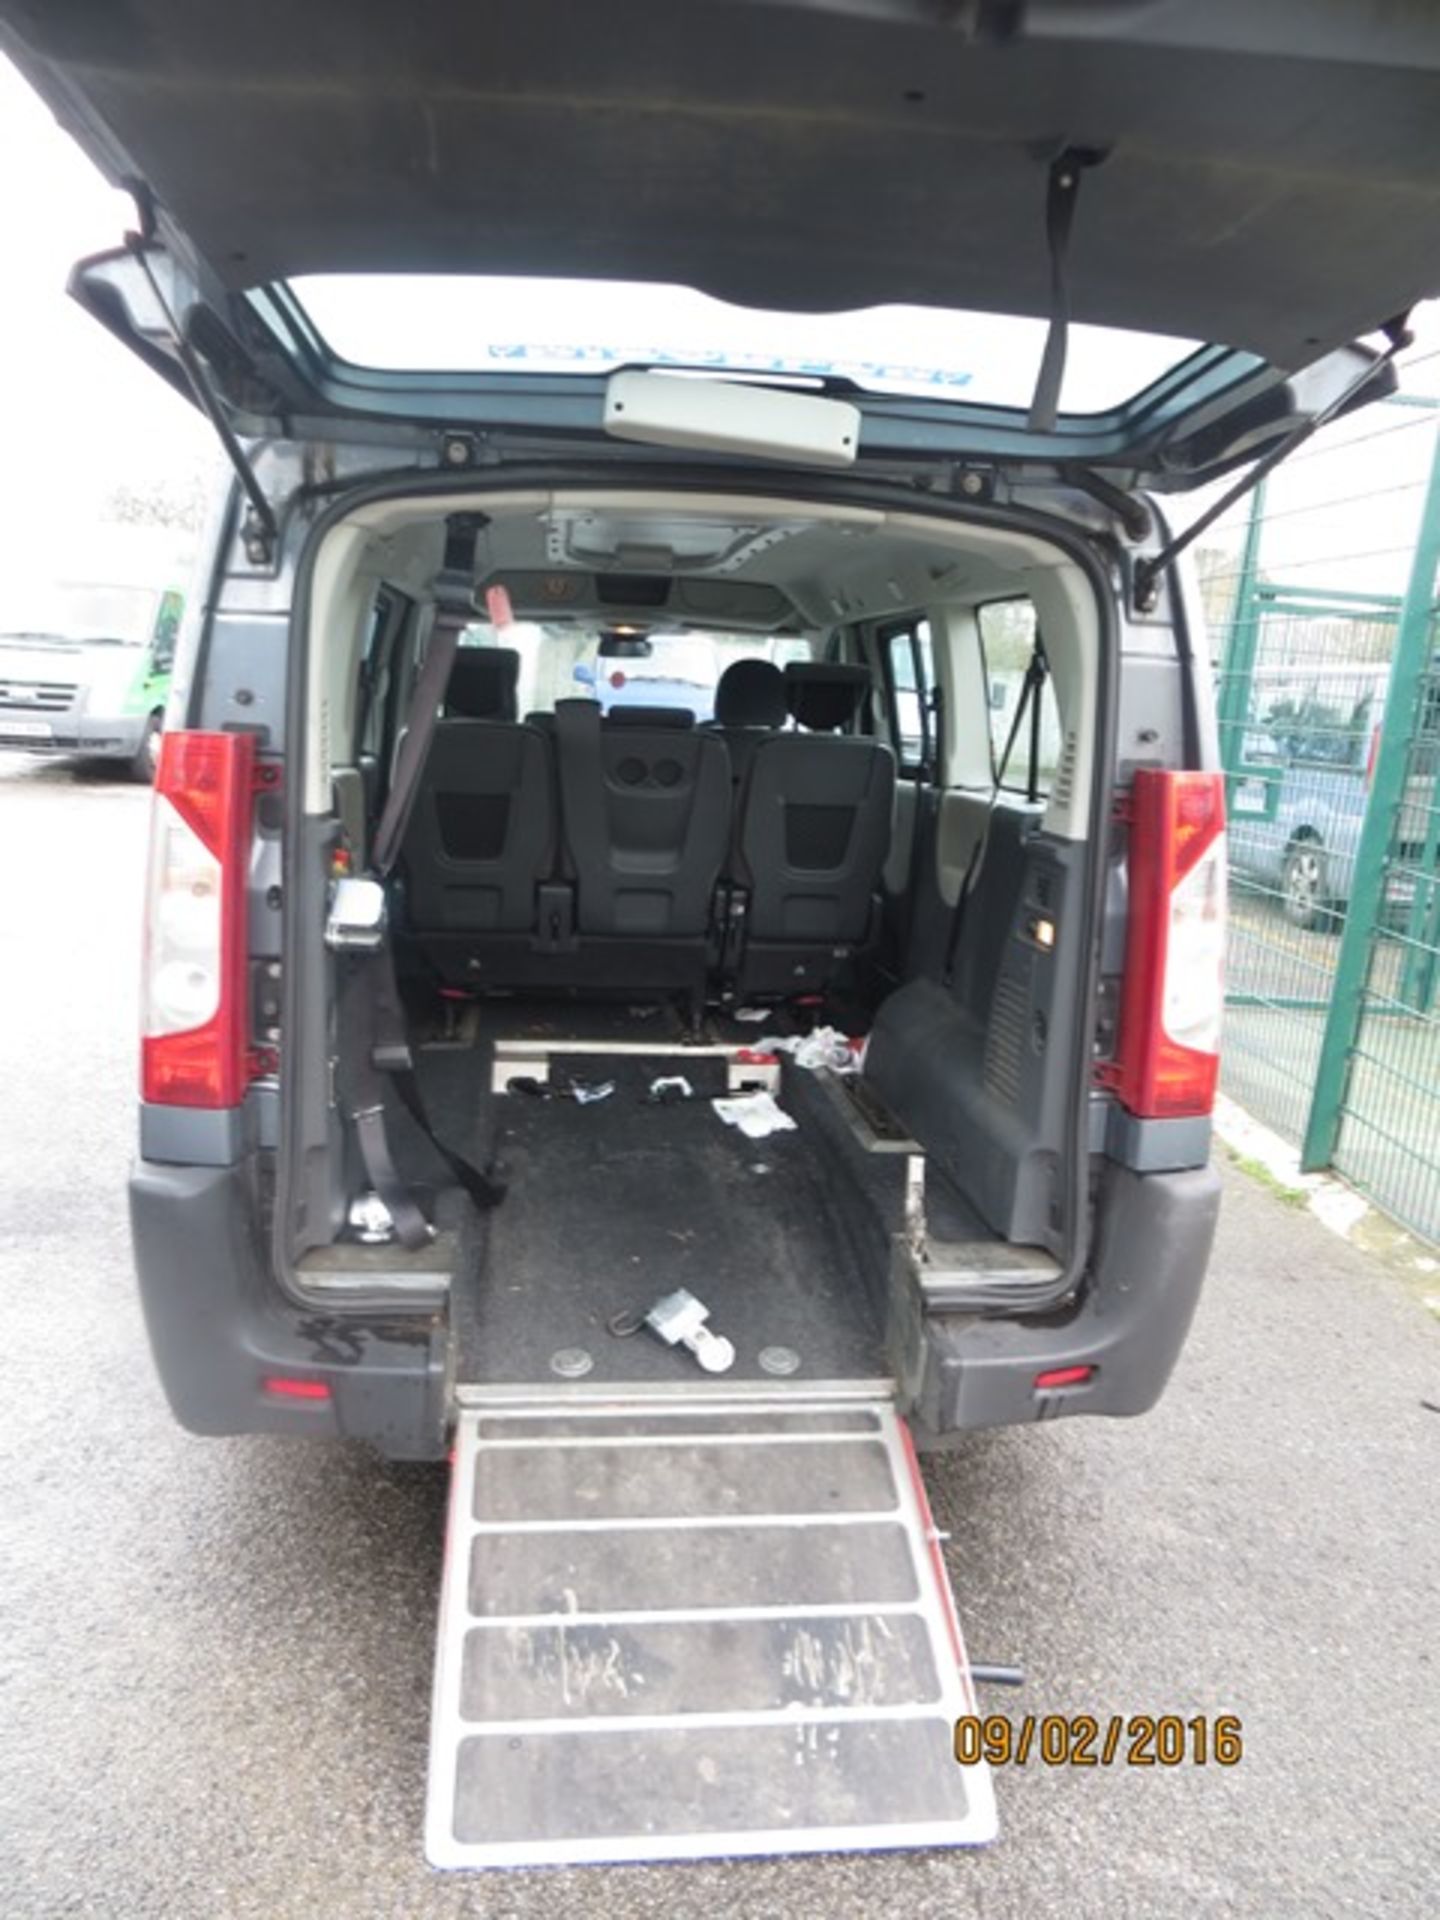 Citroen Dispatch 6 seater minibus C/W wheel chair lift and access YJ58 XNT mileage 150,445km Vehicle - Image 4 of 6